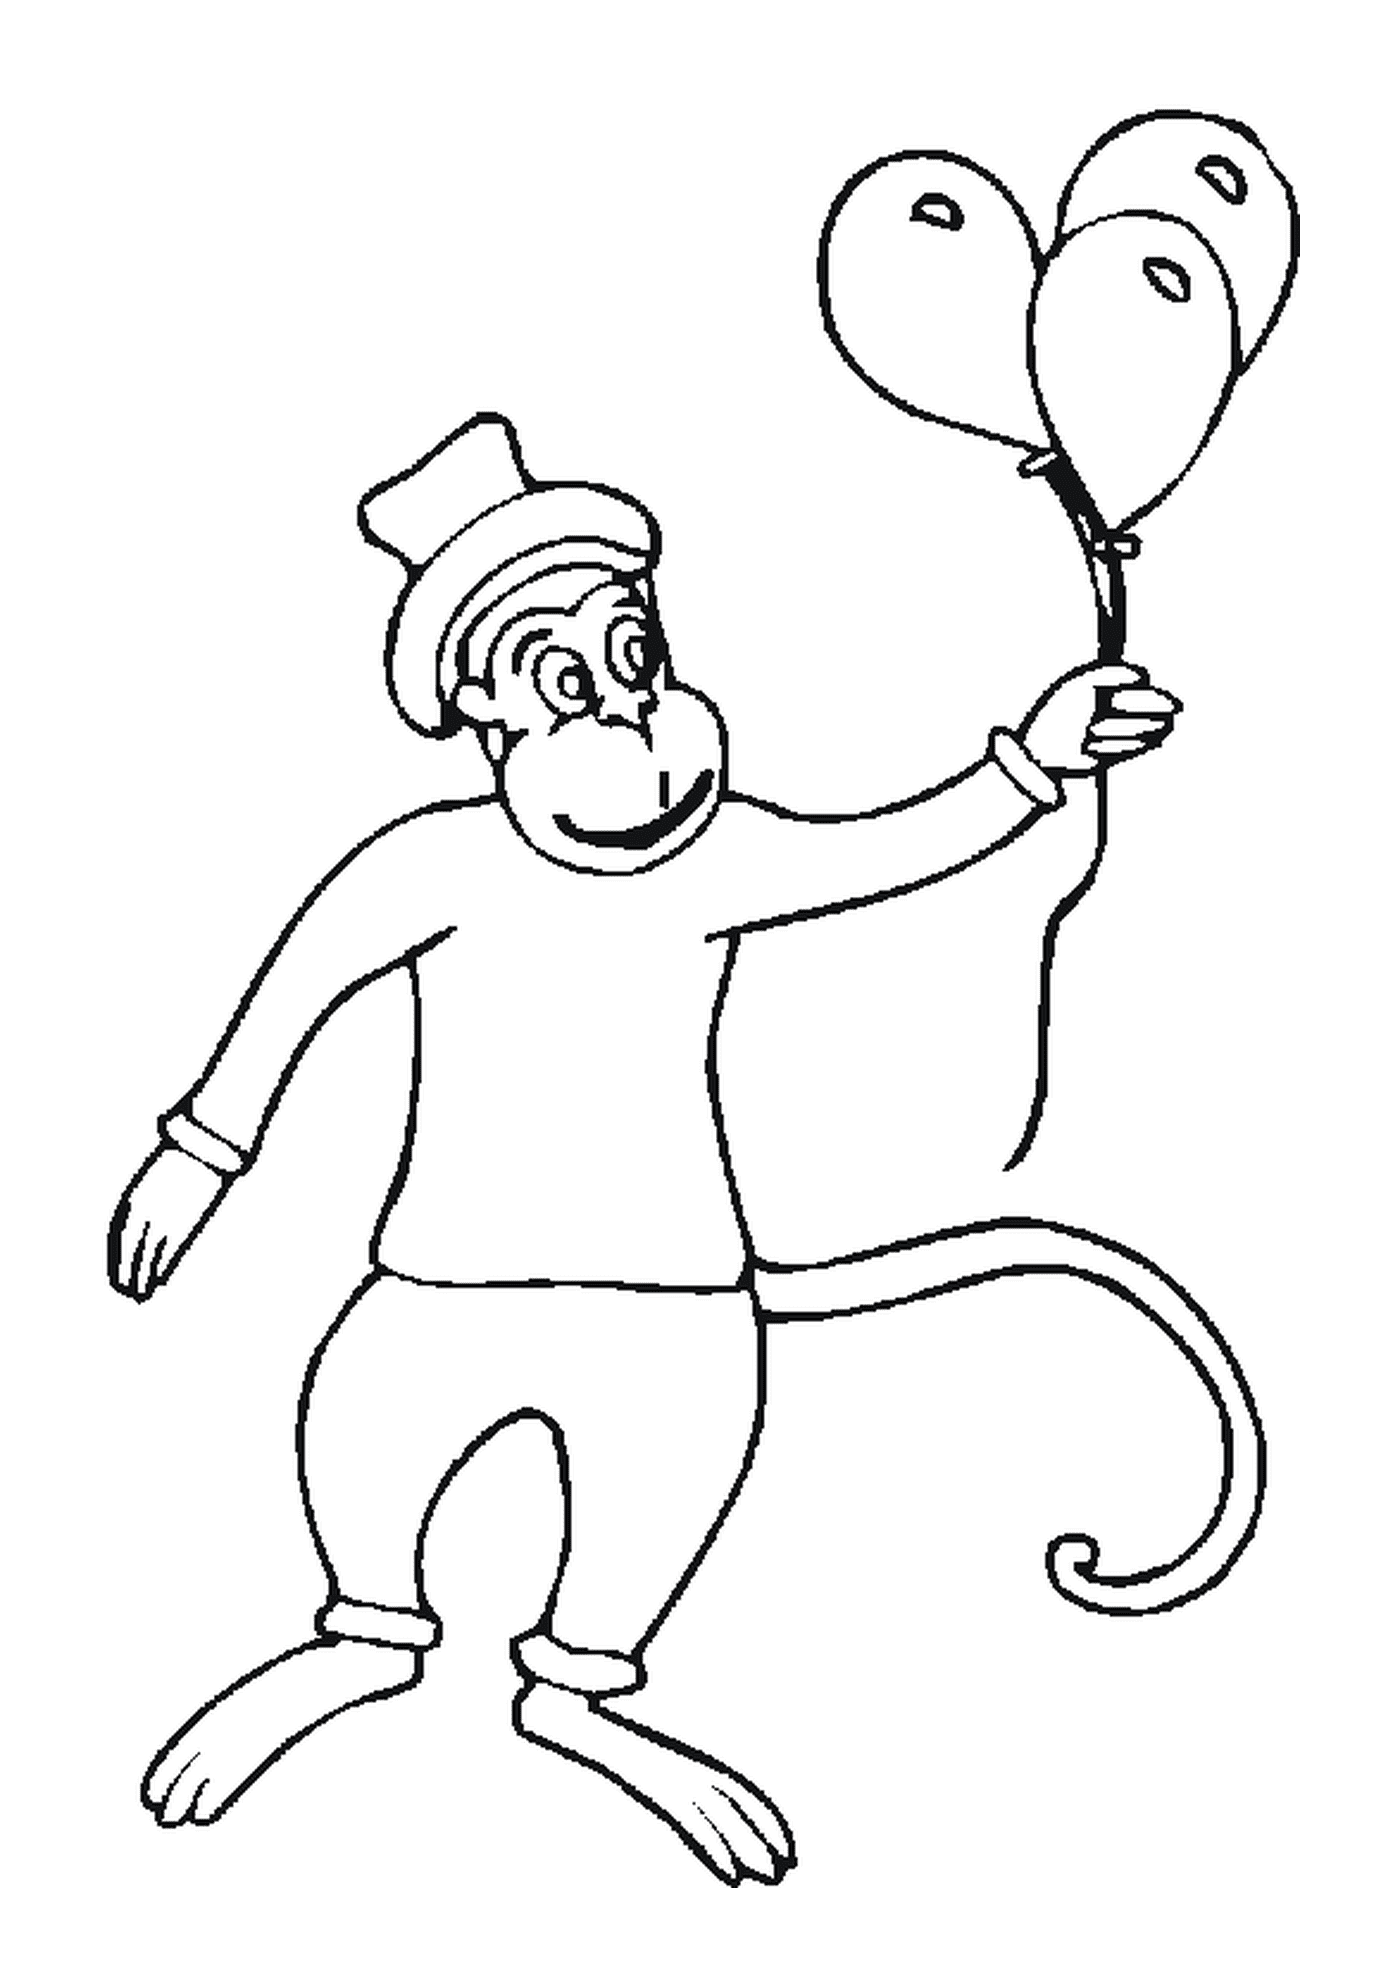  Monkey with balloons and a hat 